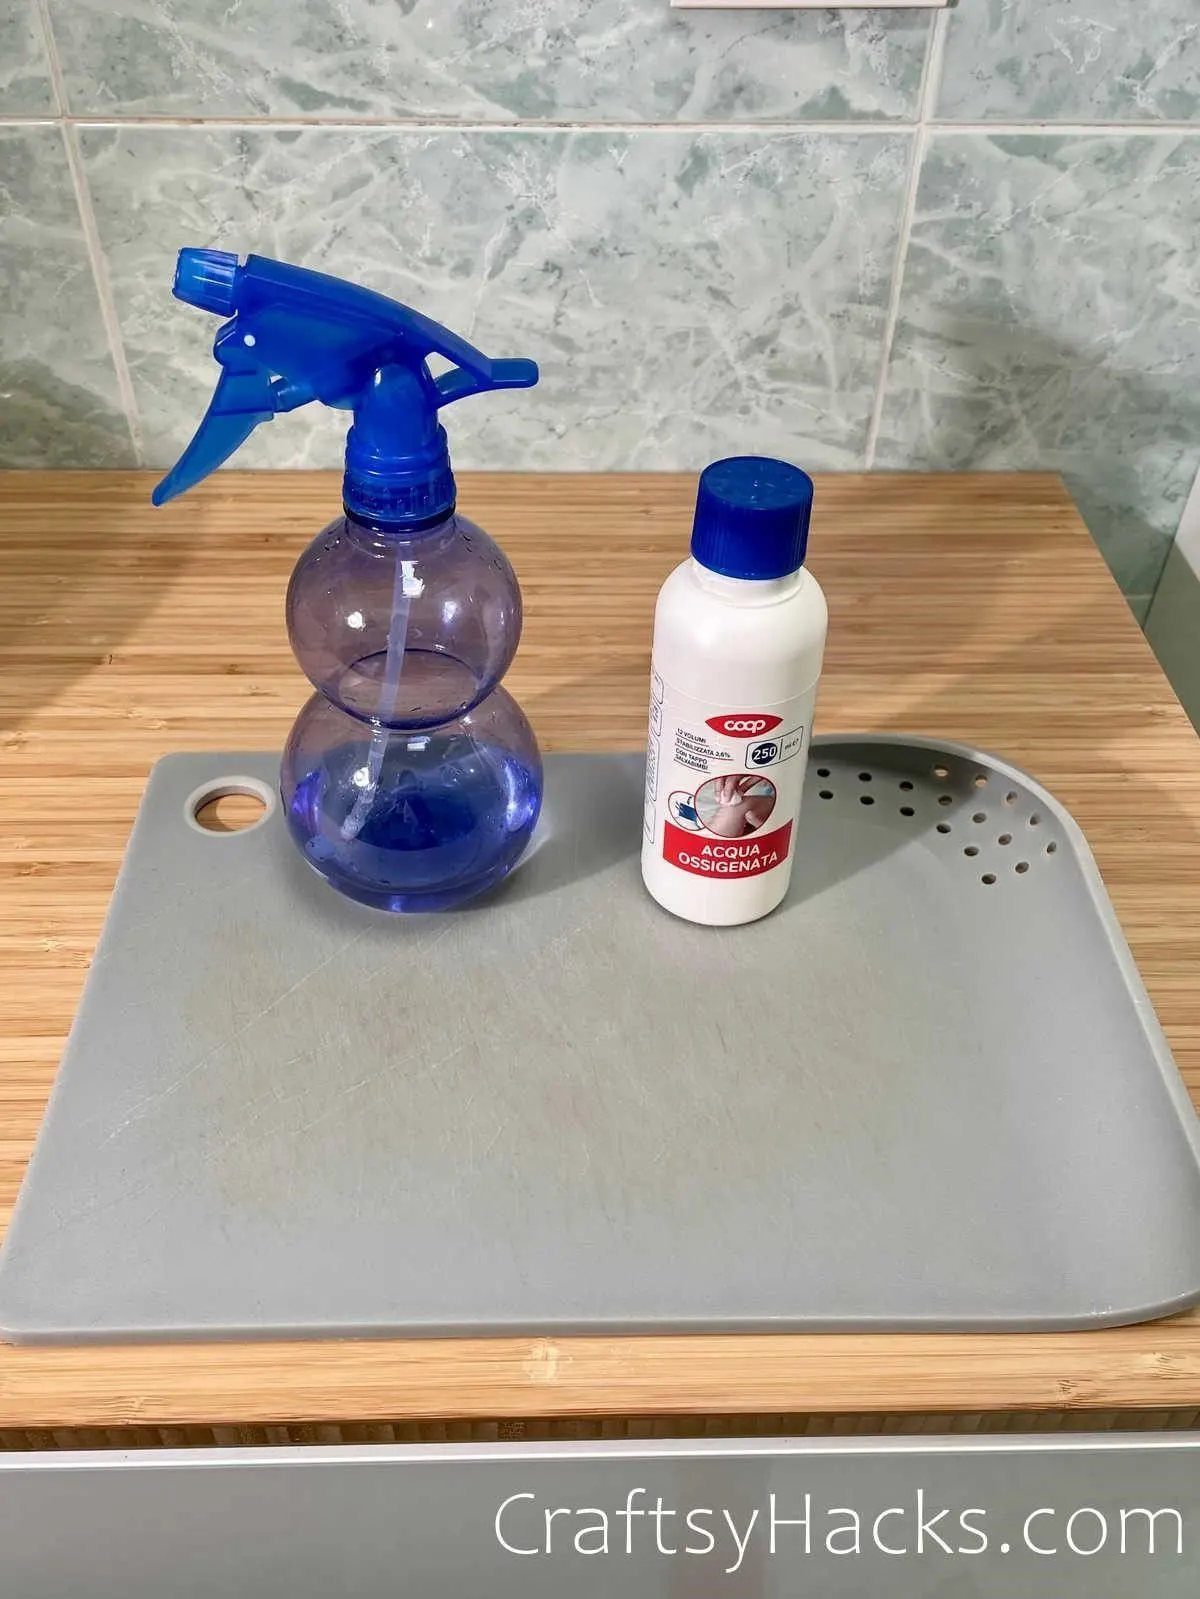 sanitize cutting boards